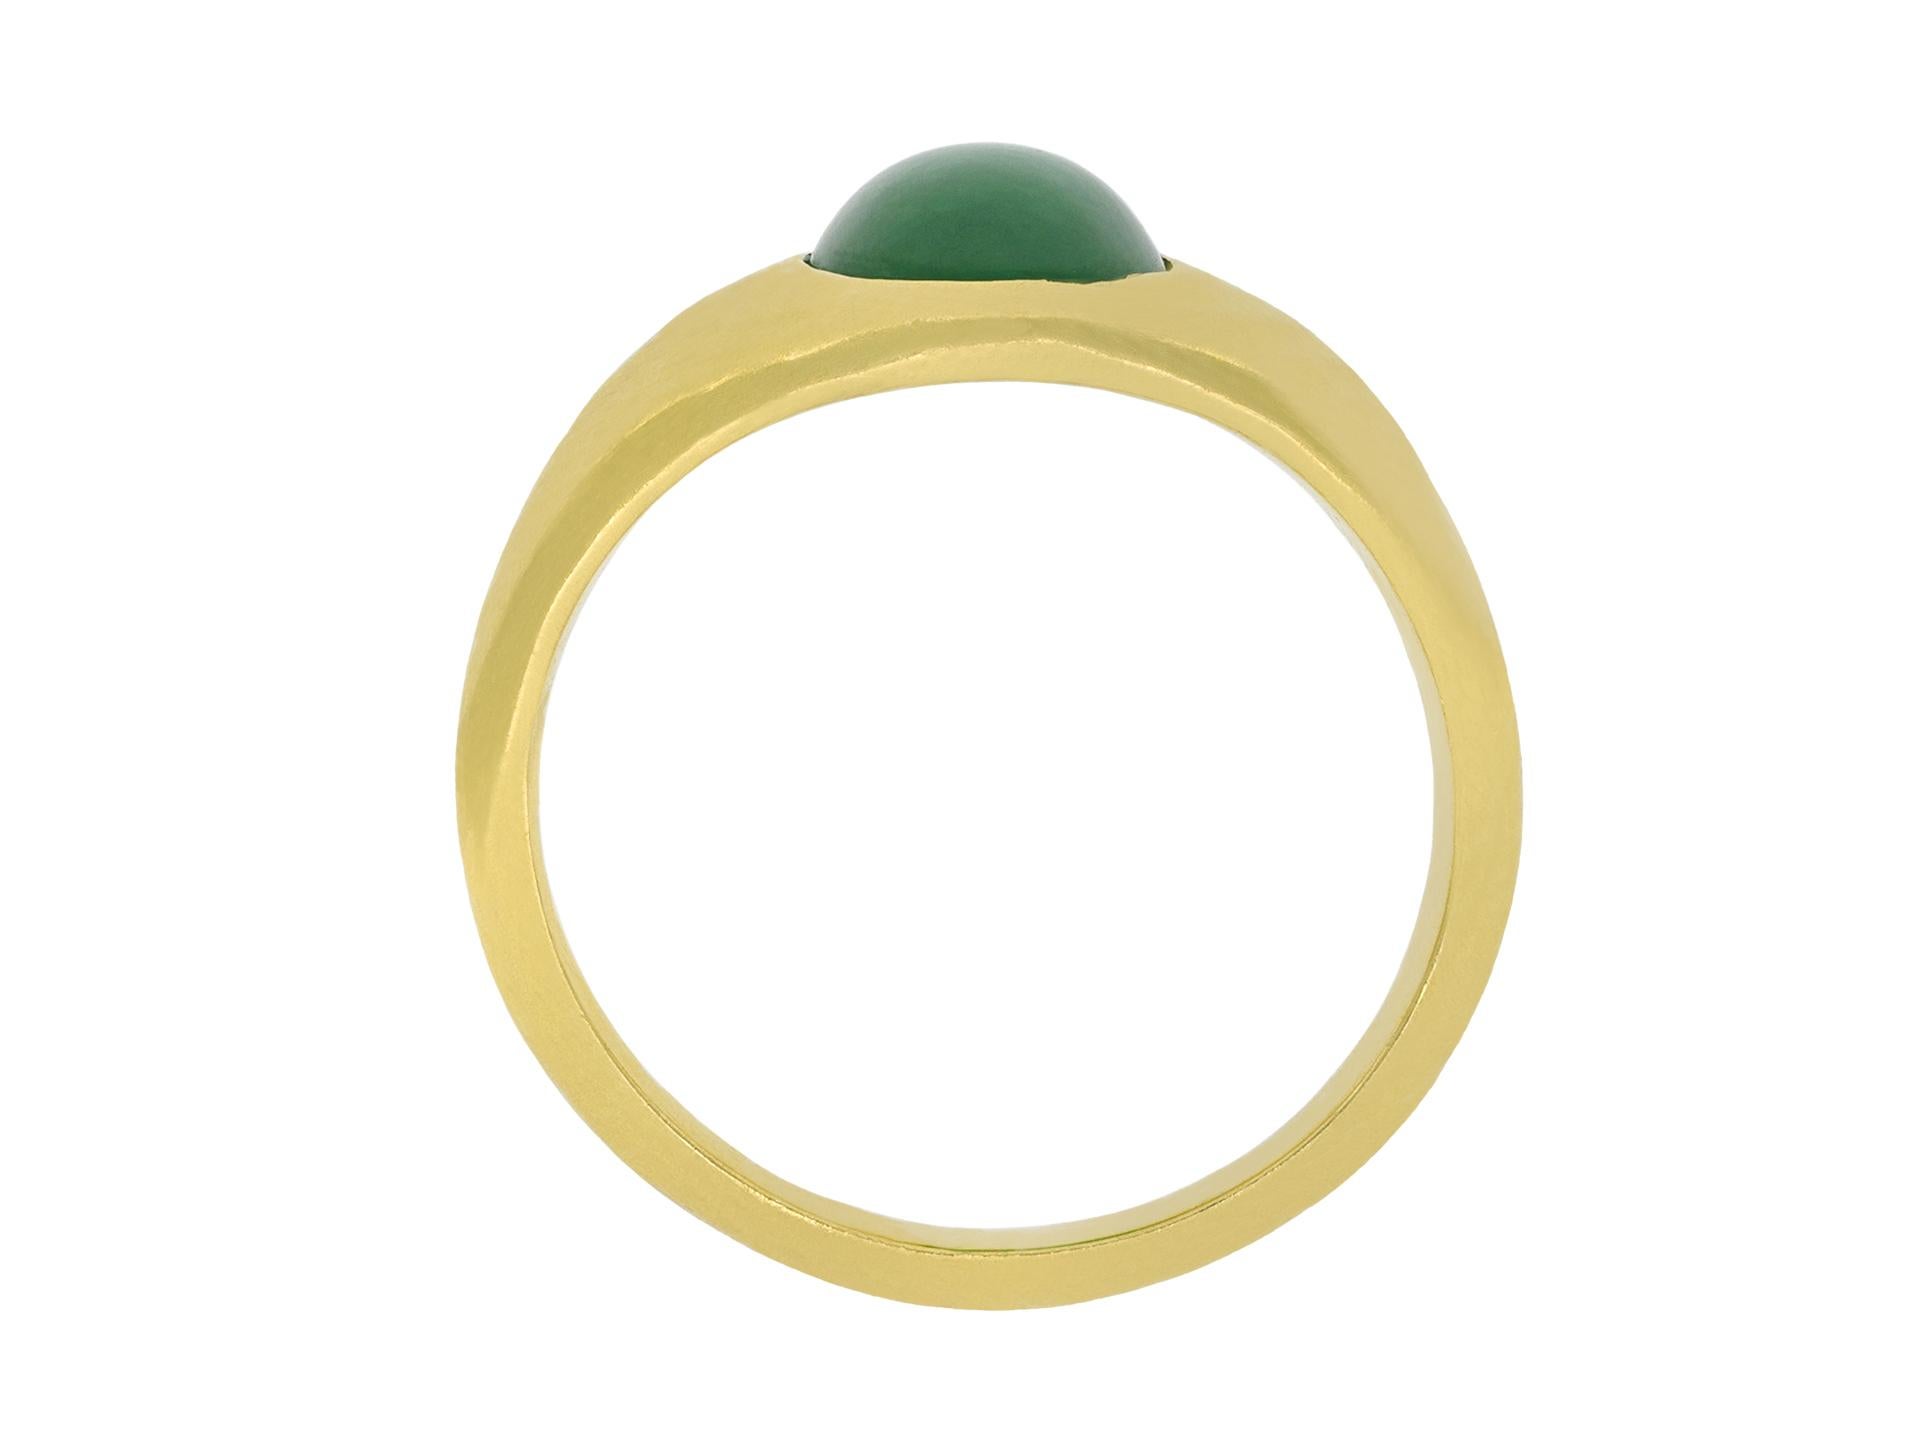 Type-A jade ring. Set to centre with an oval cabochon natural unenhanced Type-A jade in an openback rubover setting with a weight of 2.81 carats, to a solitaire design, featuring polished edges, a conforming gallery and oval open backholing, the